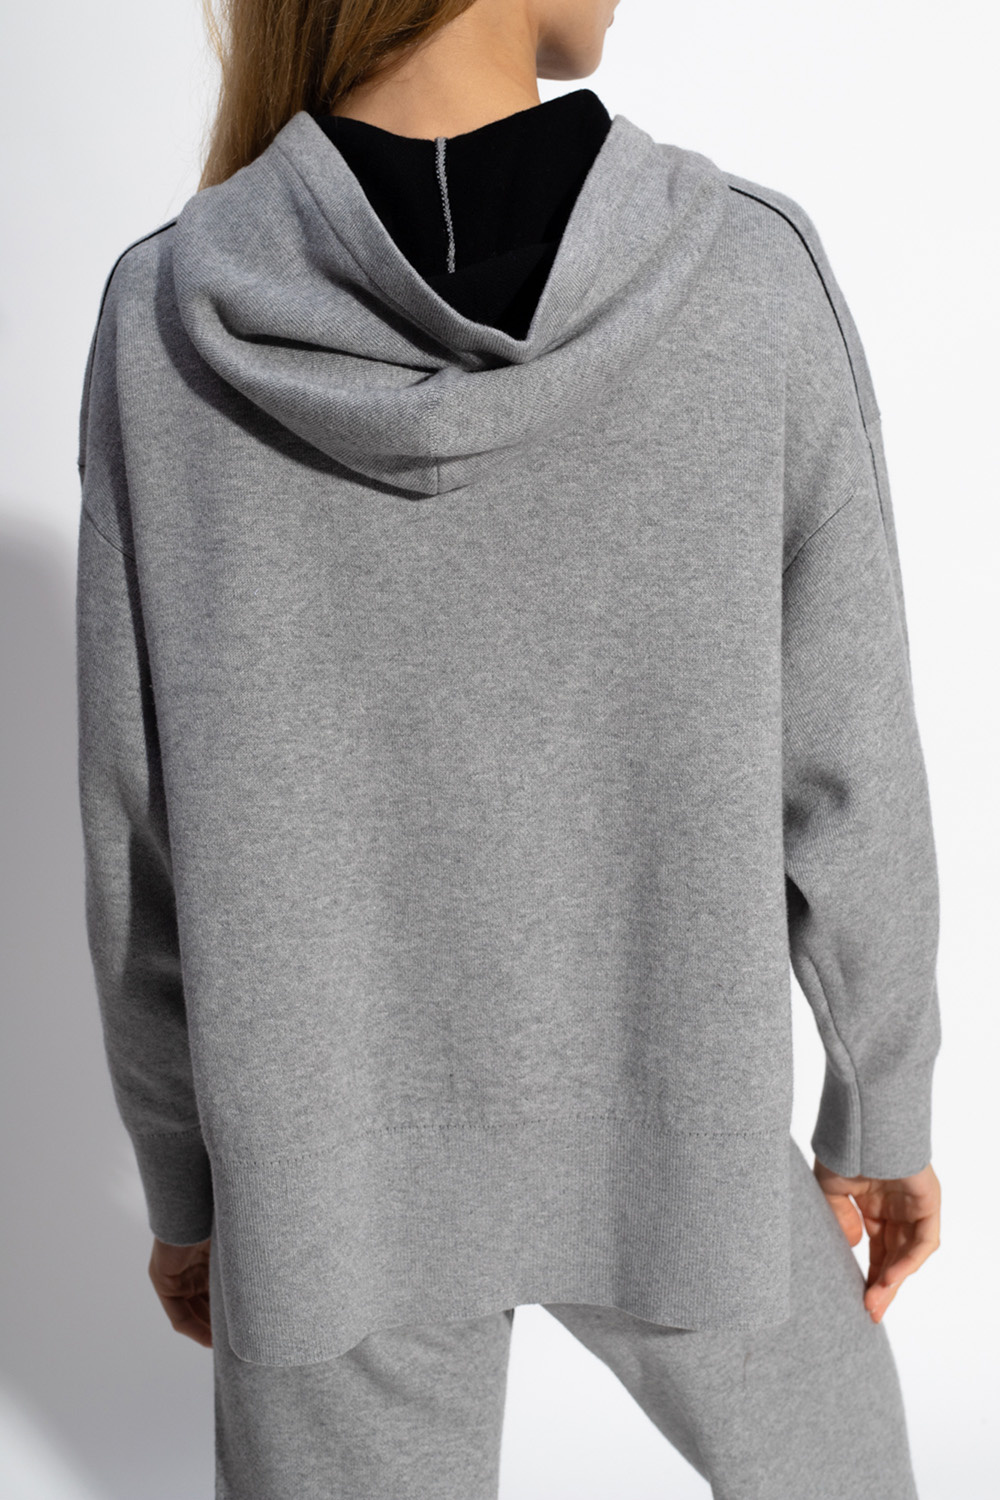 Proenza Schouler White Label Hooded sweater